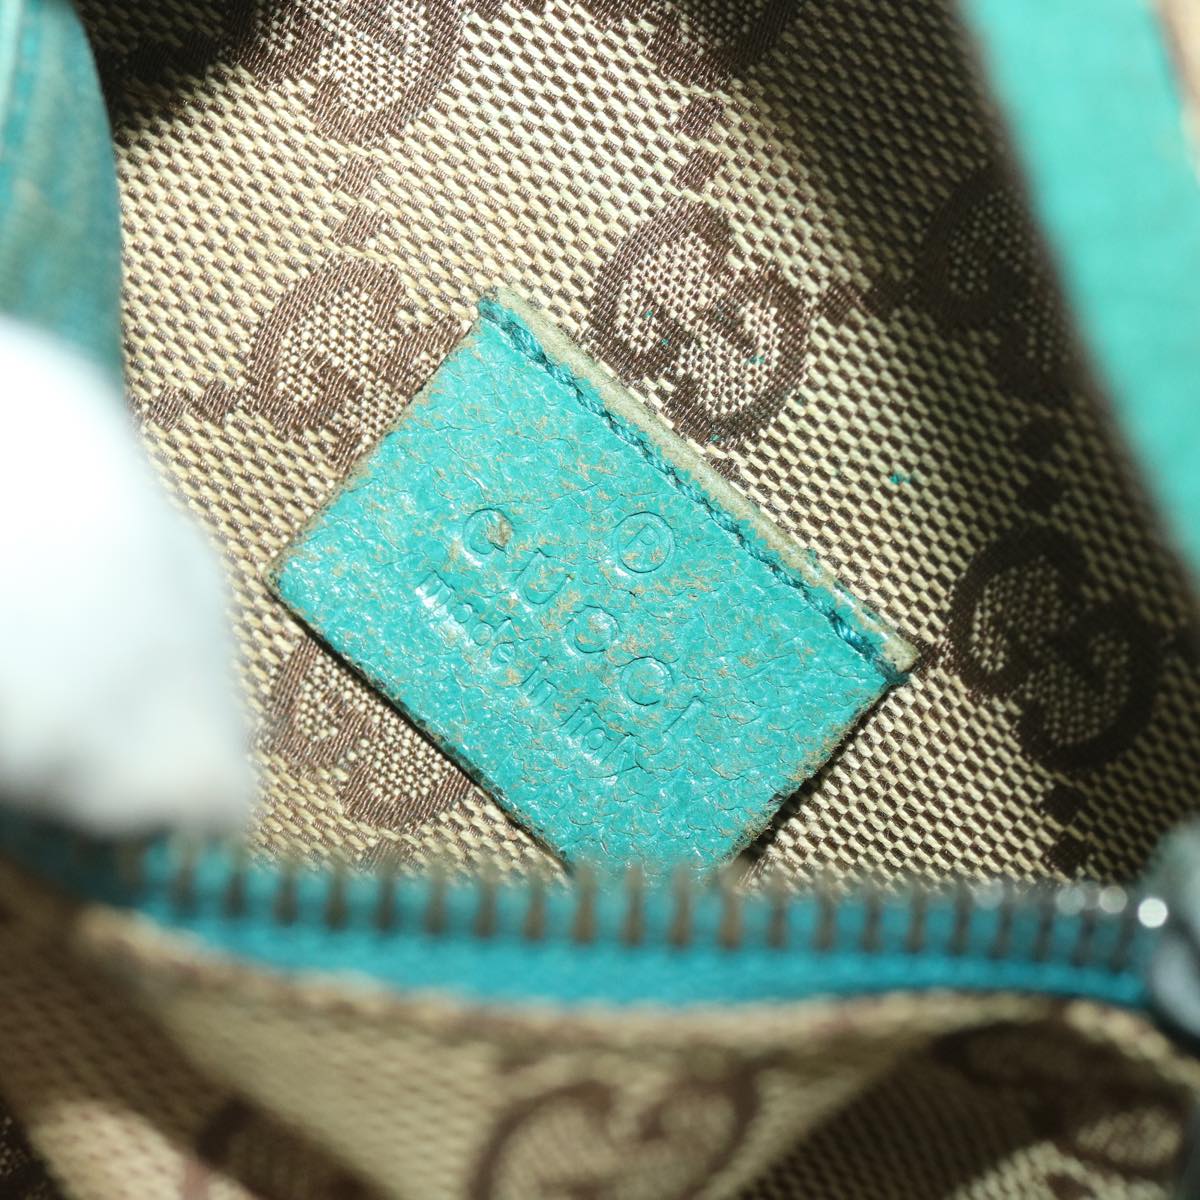 GUCCI Sherry Line GG Canvas Waist Bag Beige Turquoise Blue 28566 Auth rd4355